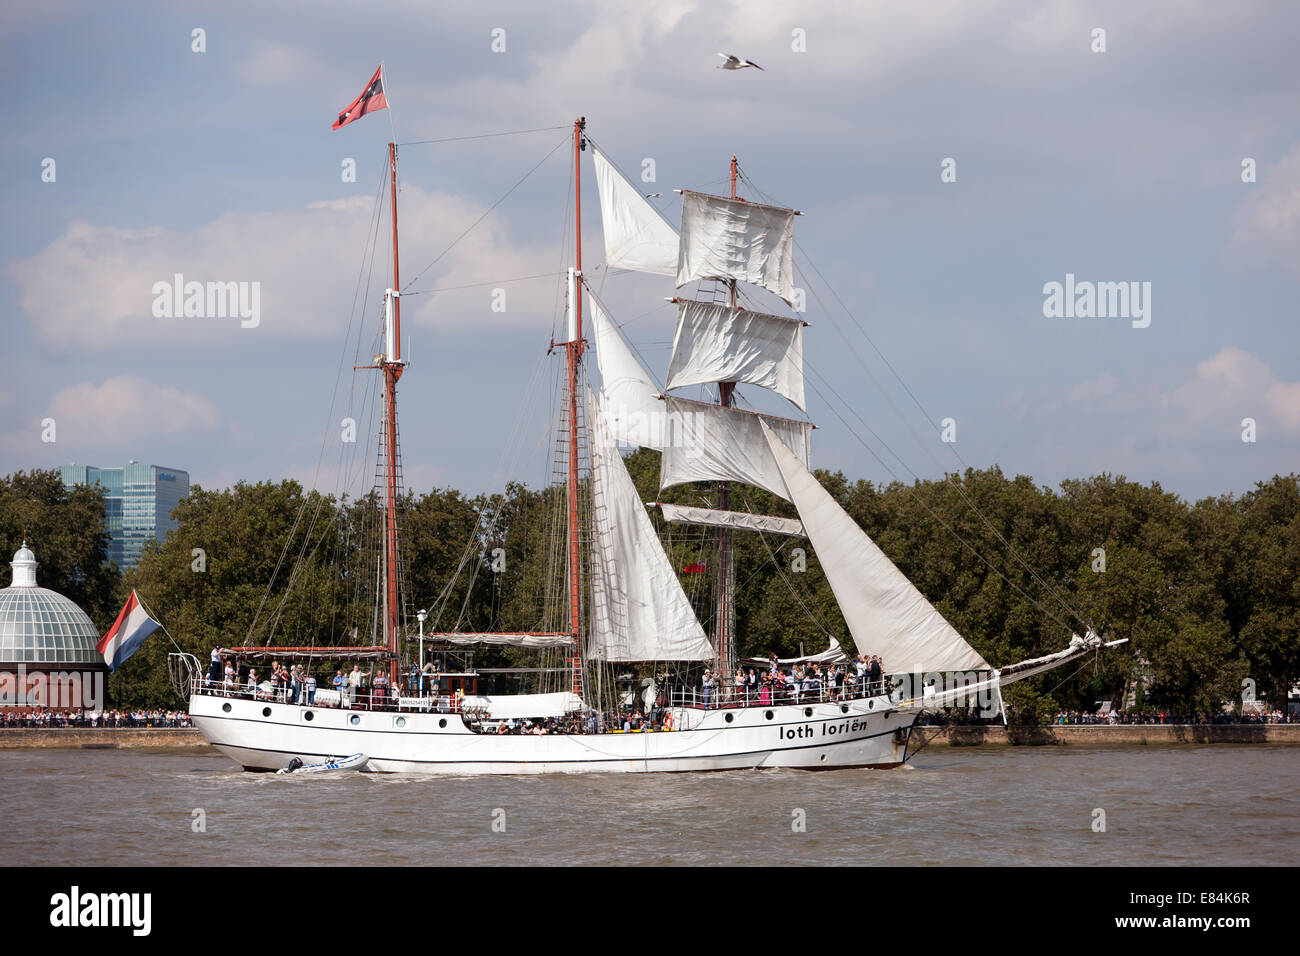 The 'Loth Lorien', taking part in the parade of Sale, during the Tall Ships Festival, Greenwich. Stock Photo